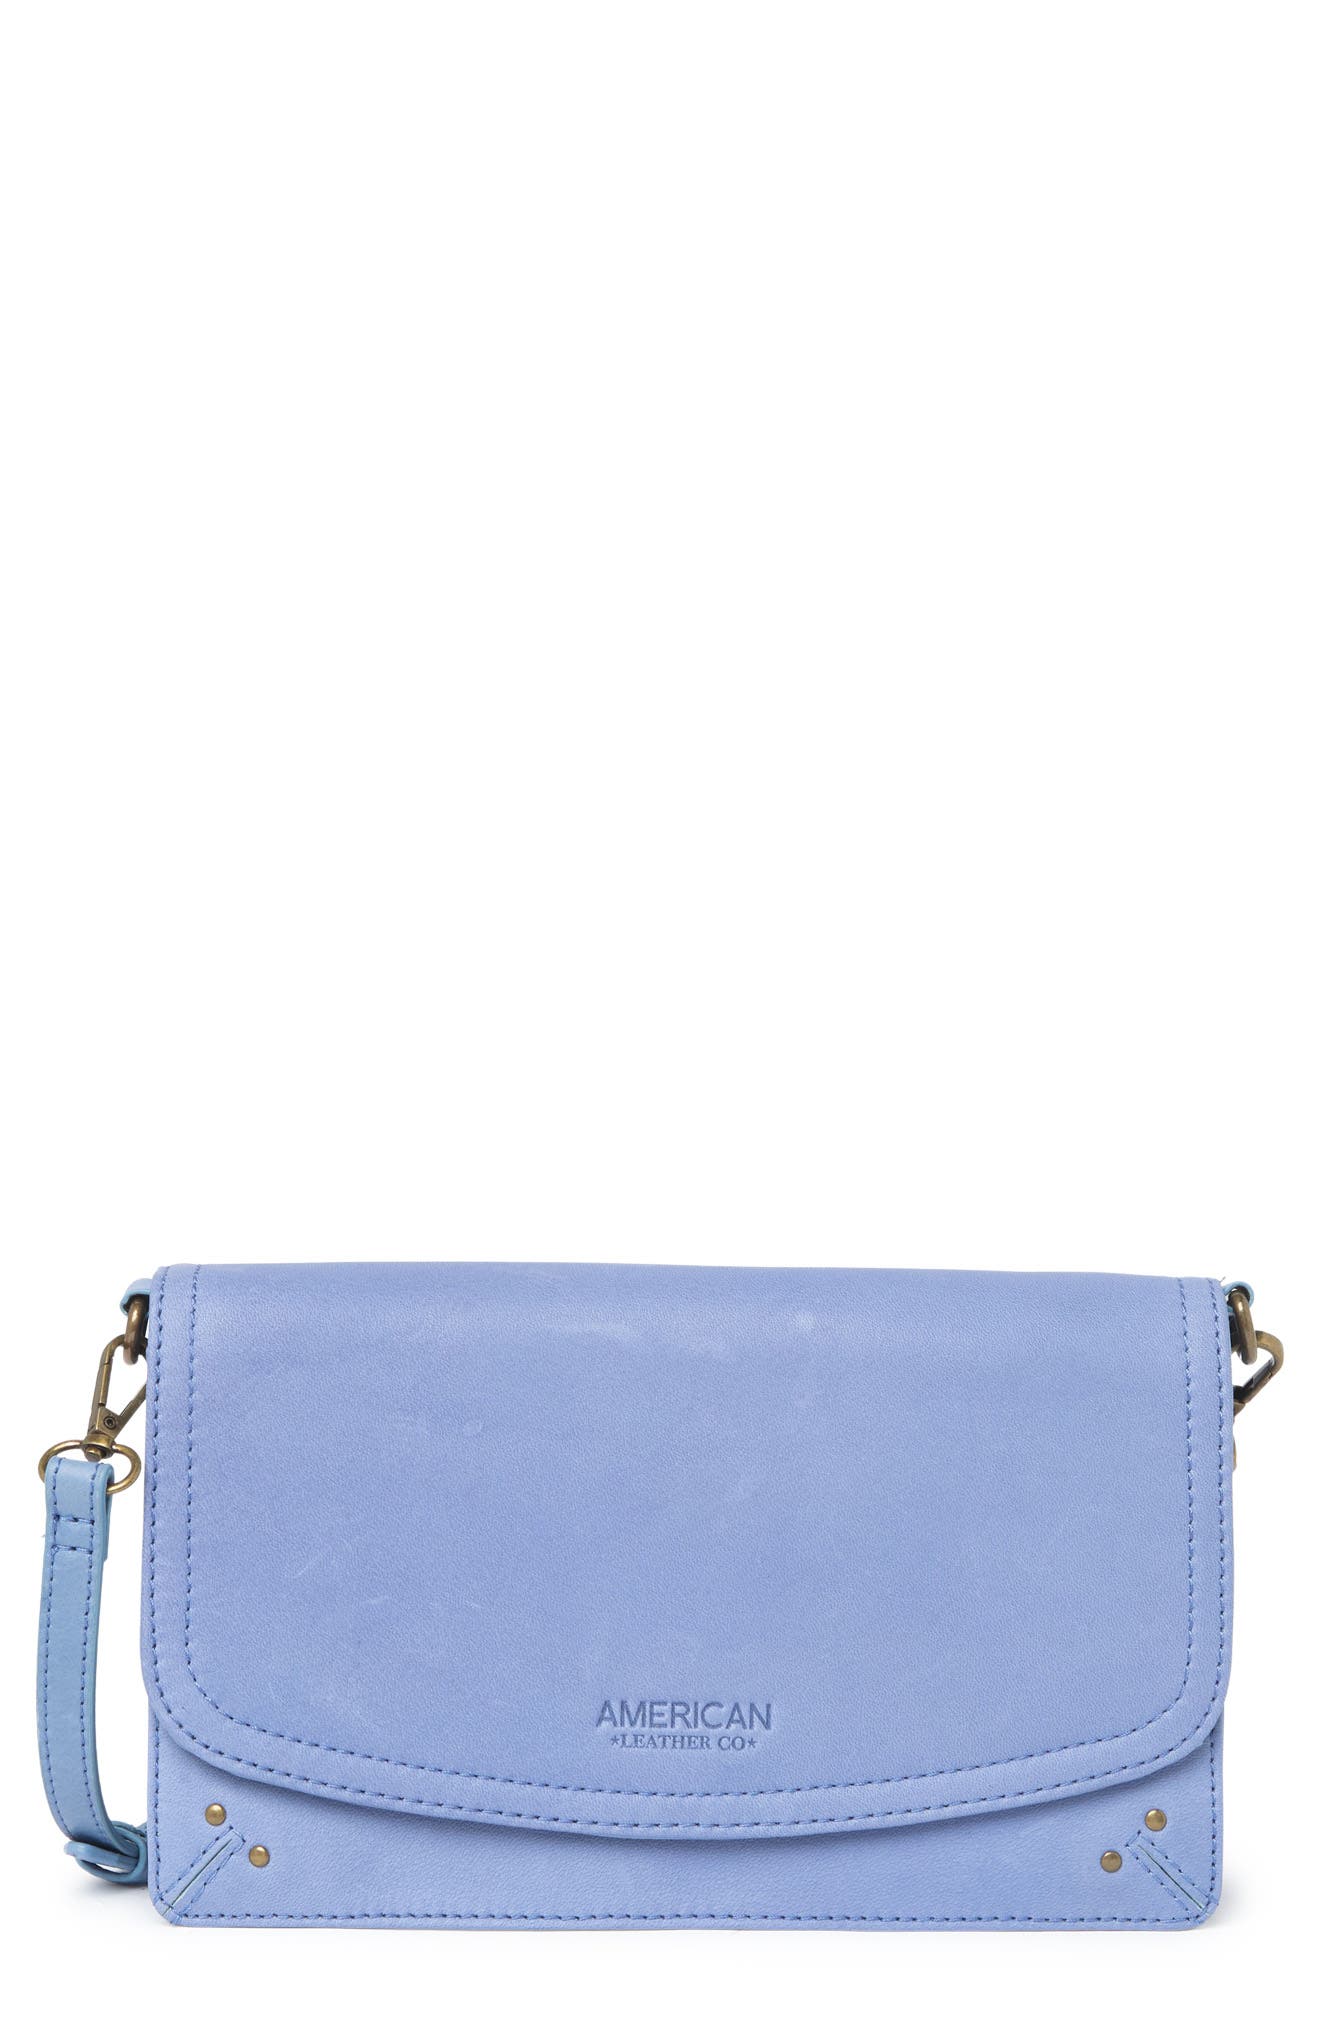 American Leather Co. Brenton Leather Crossbody Bag In Glacier Blue Smooth